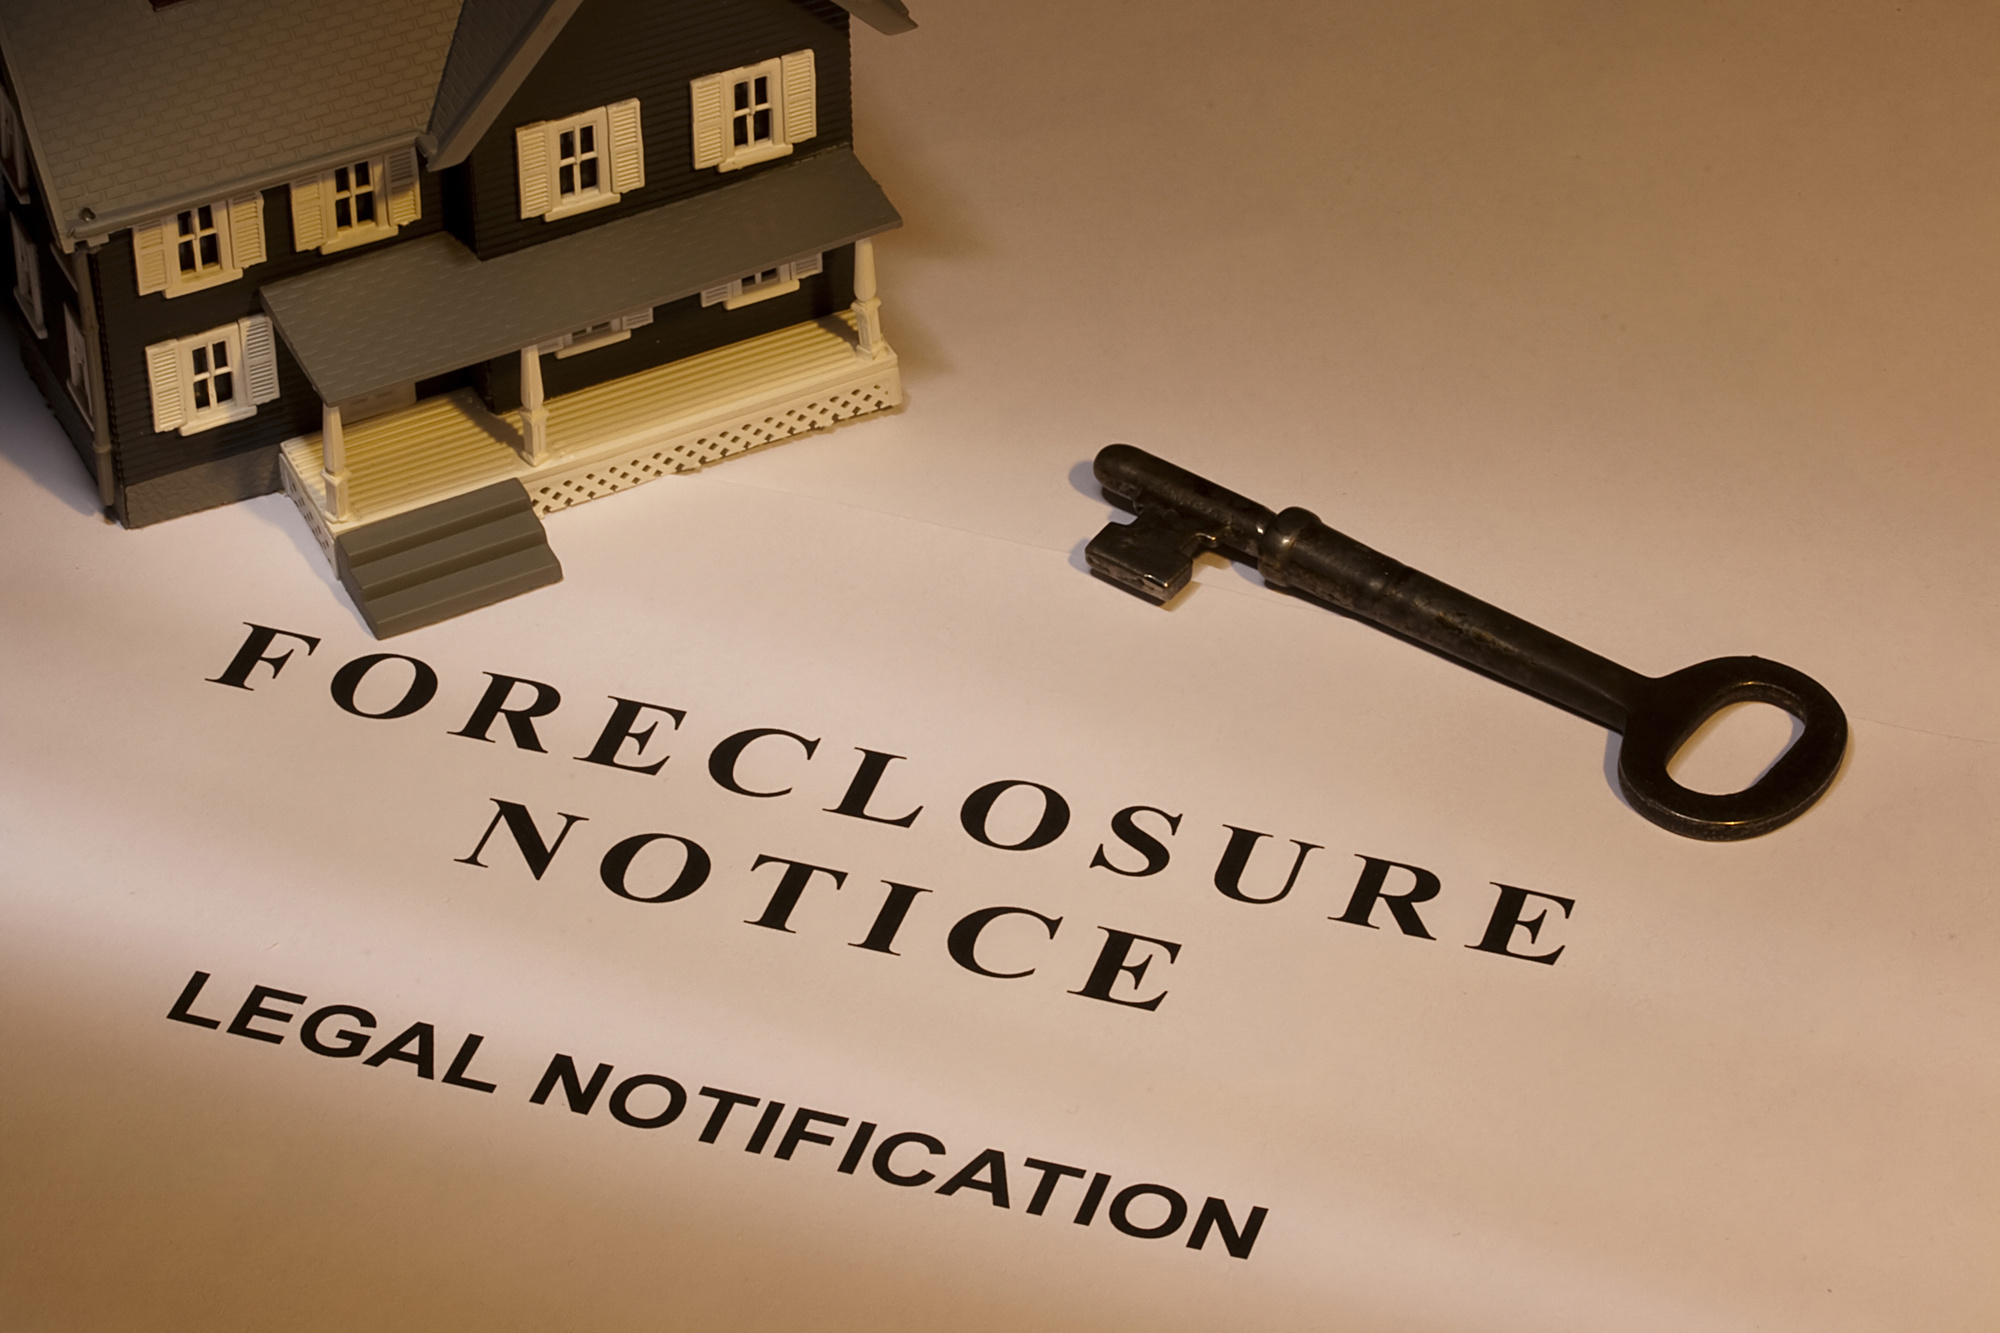 Pre-foreclosure: Options to Get Out From Under Your House￼